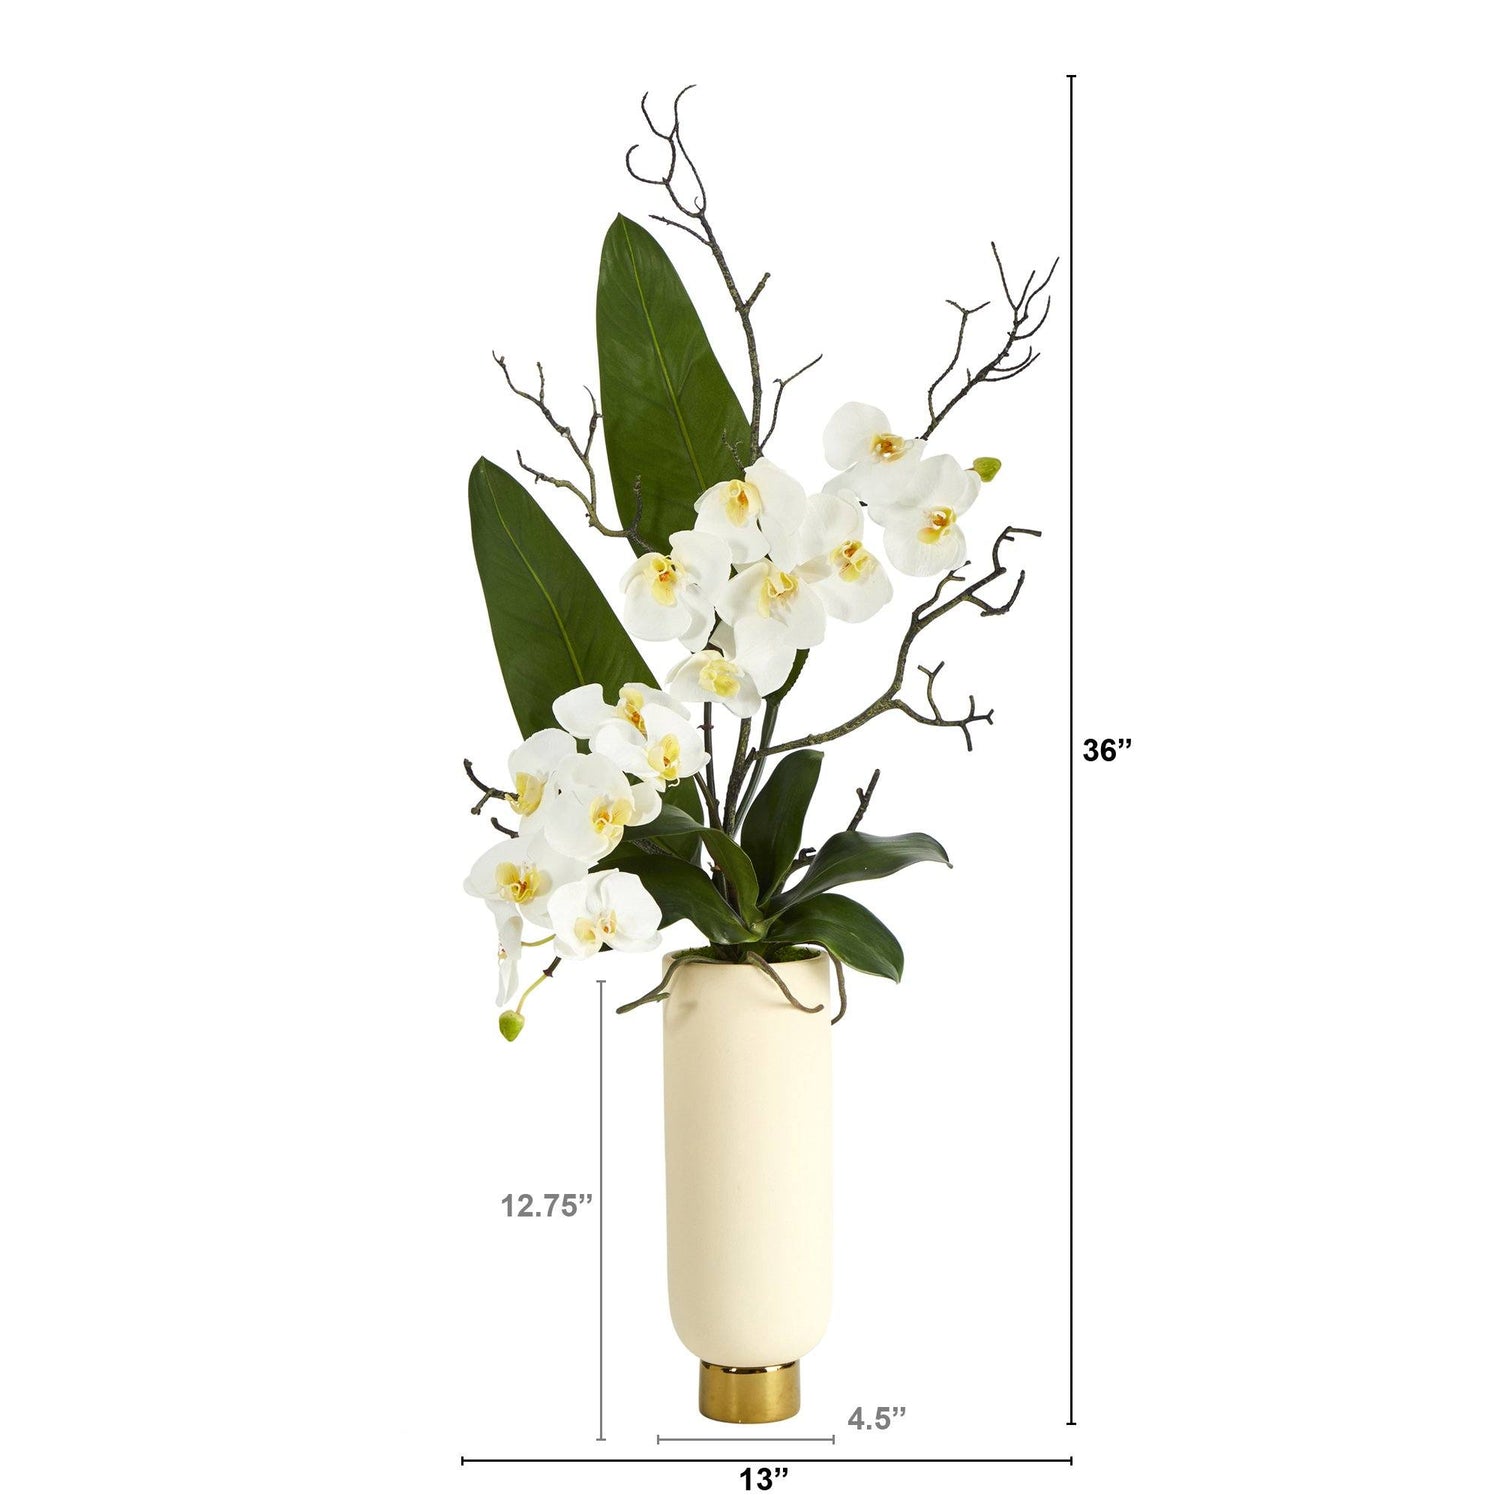 3’ Phalaenopsis Orchid Artificial Arrangement in Cream Vase with Gold Base